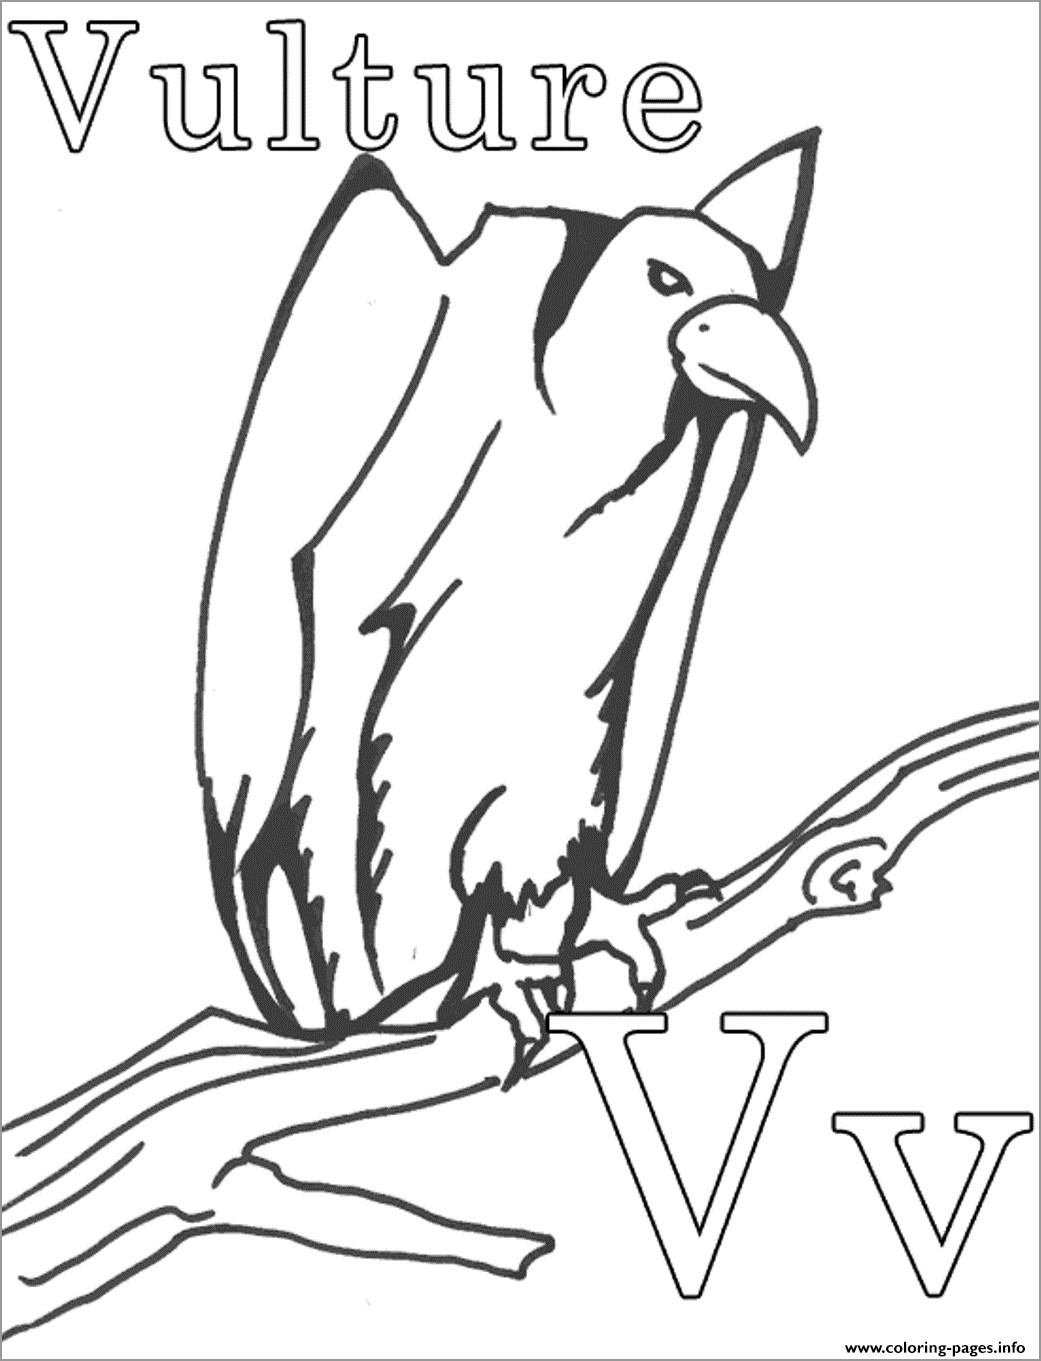 V for Vulture Coloring Page